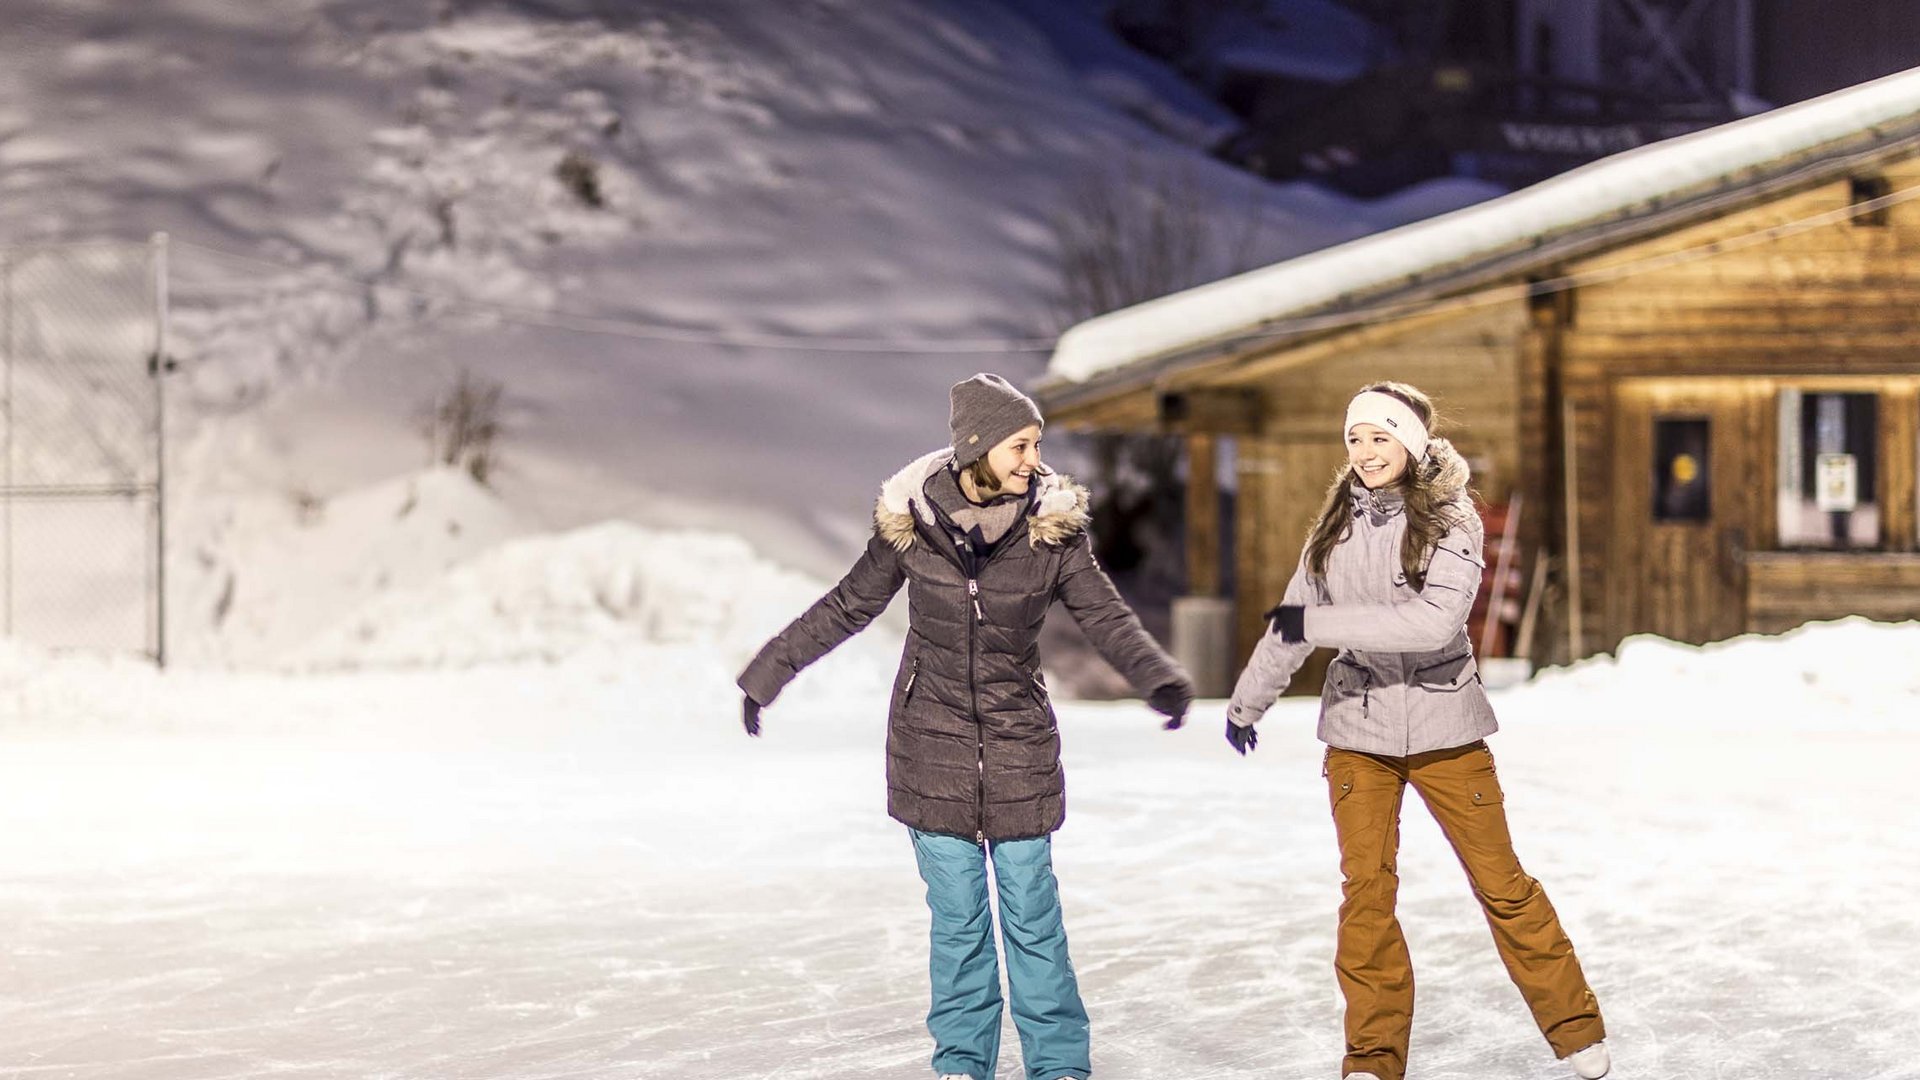 Fun off the slopes in Switzerland on your winter holiday